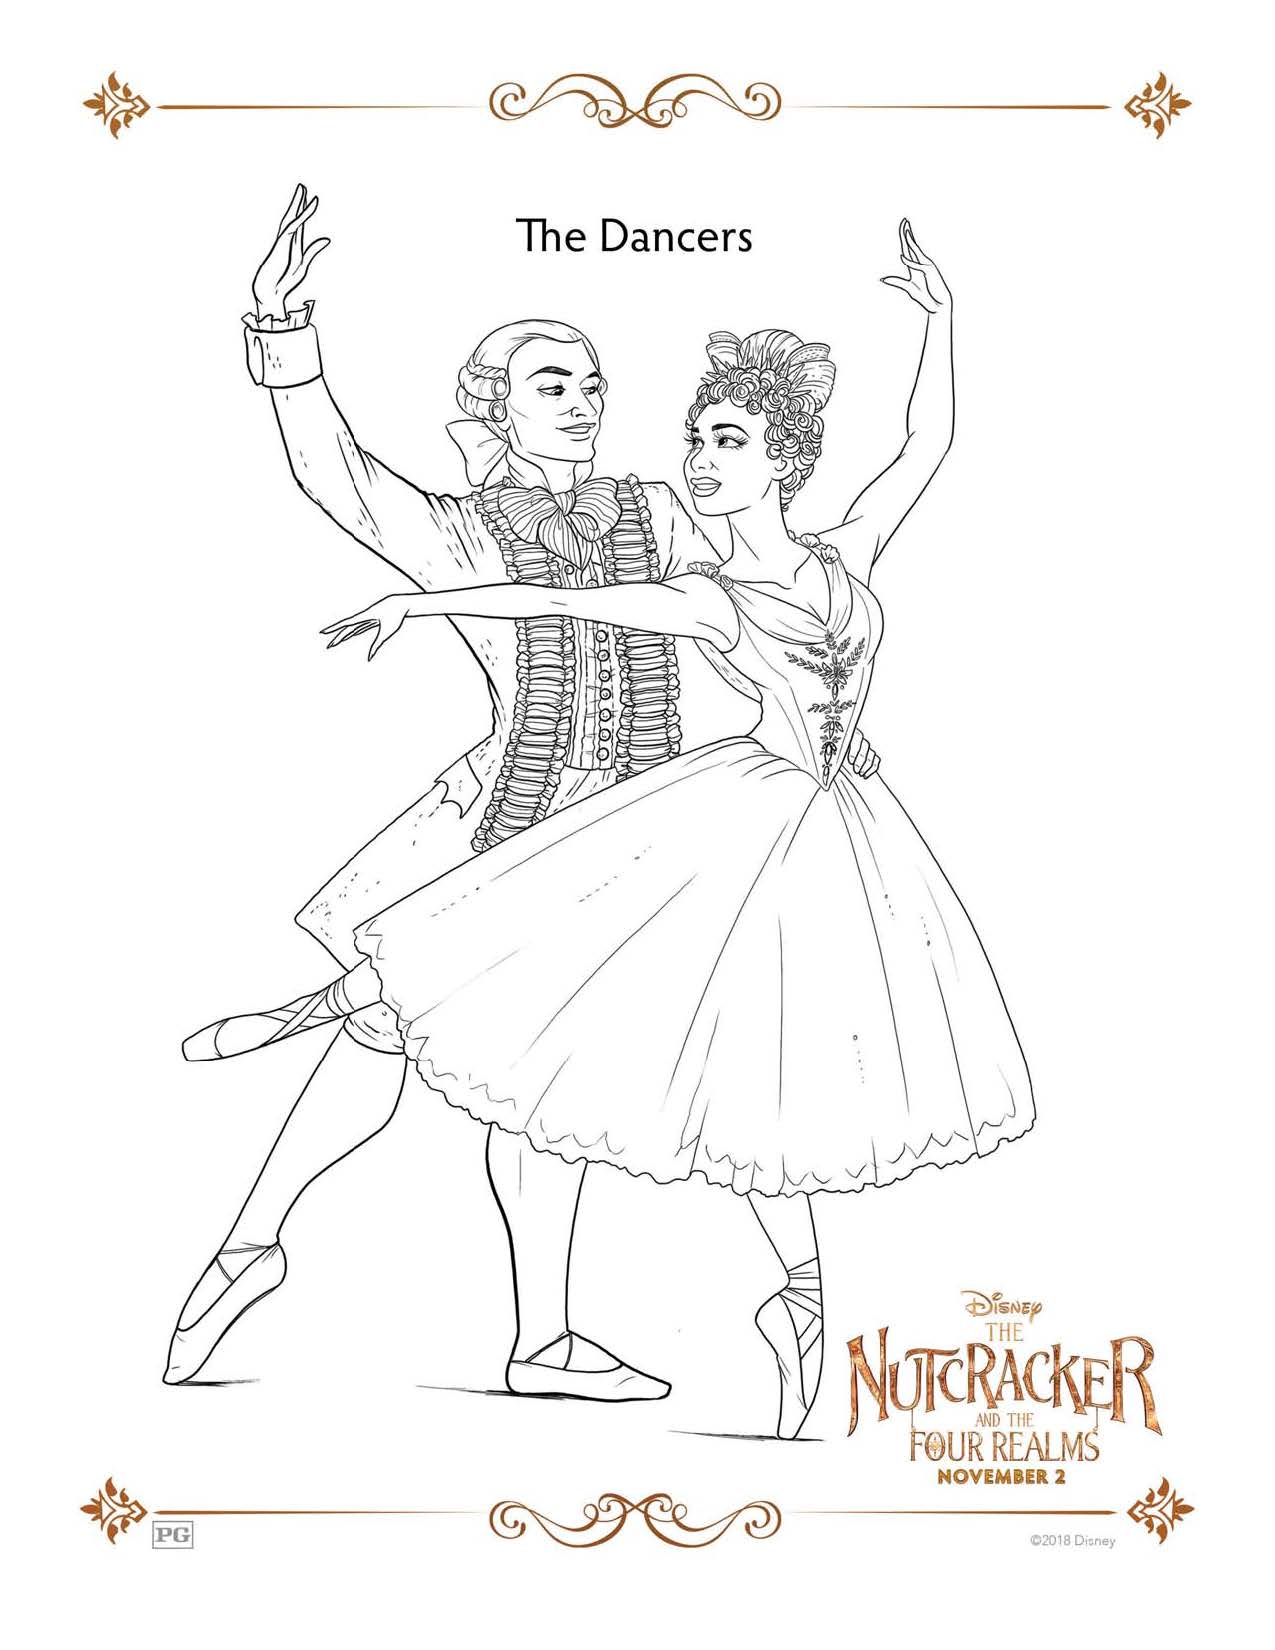 The Dancers - The Nutcracker and The Four Realms Coloring Pages and Activity Sheets